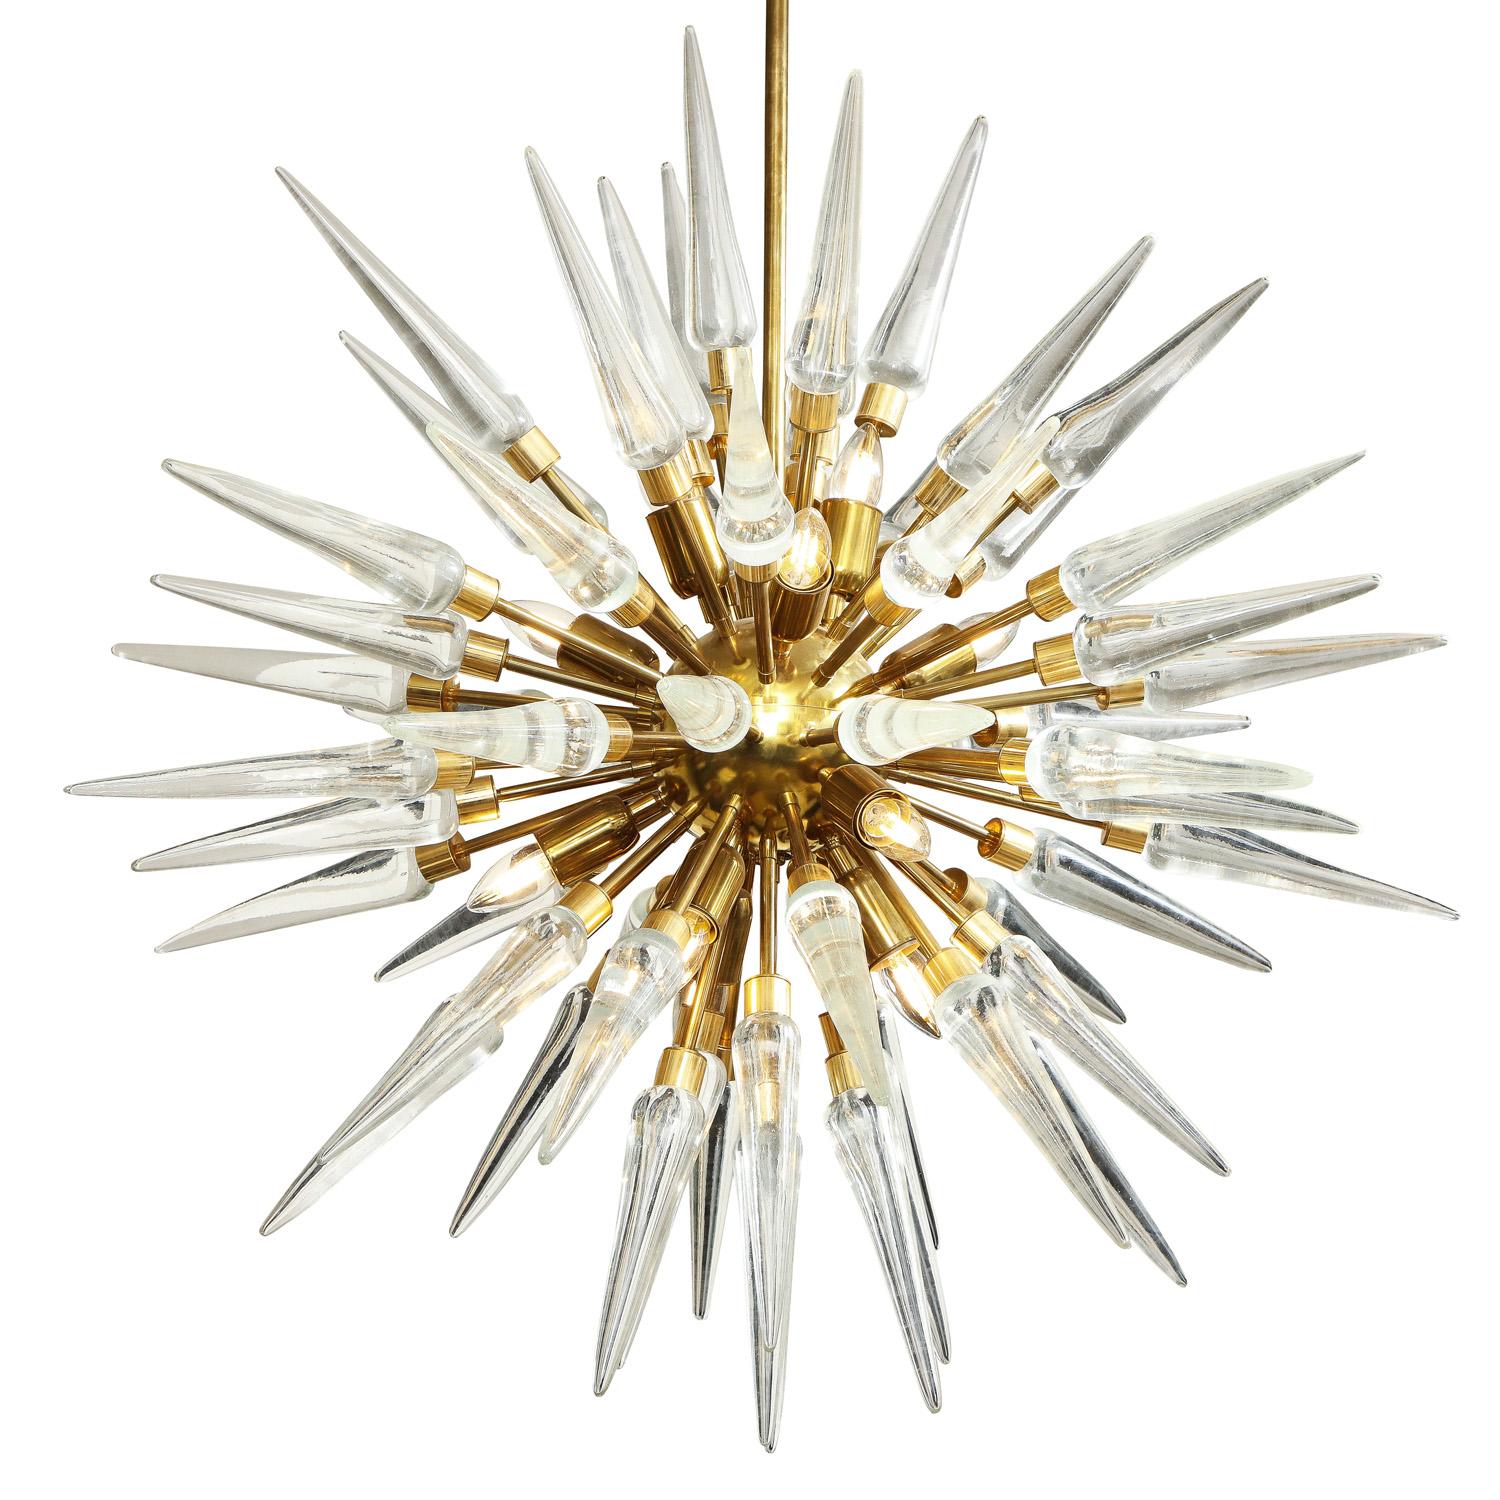 Mid-Century Modern Stunning Sputnik-Style Chandelier in Polished Brass with Glass Spikes 2022 For Sale